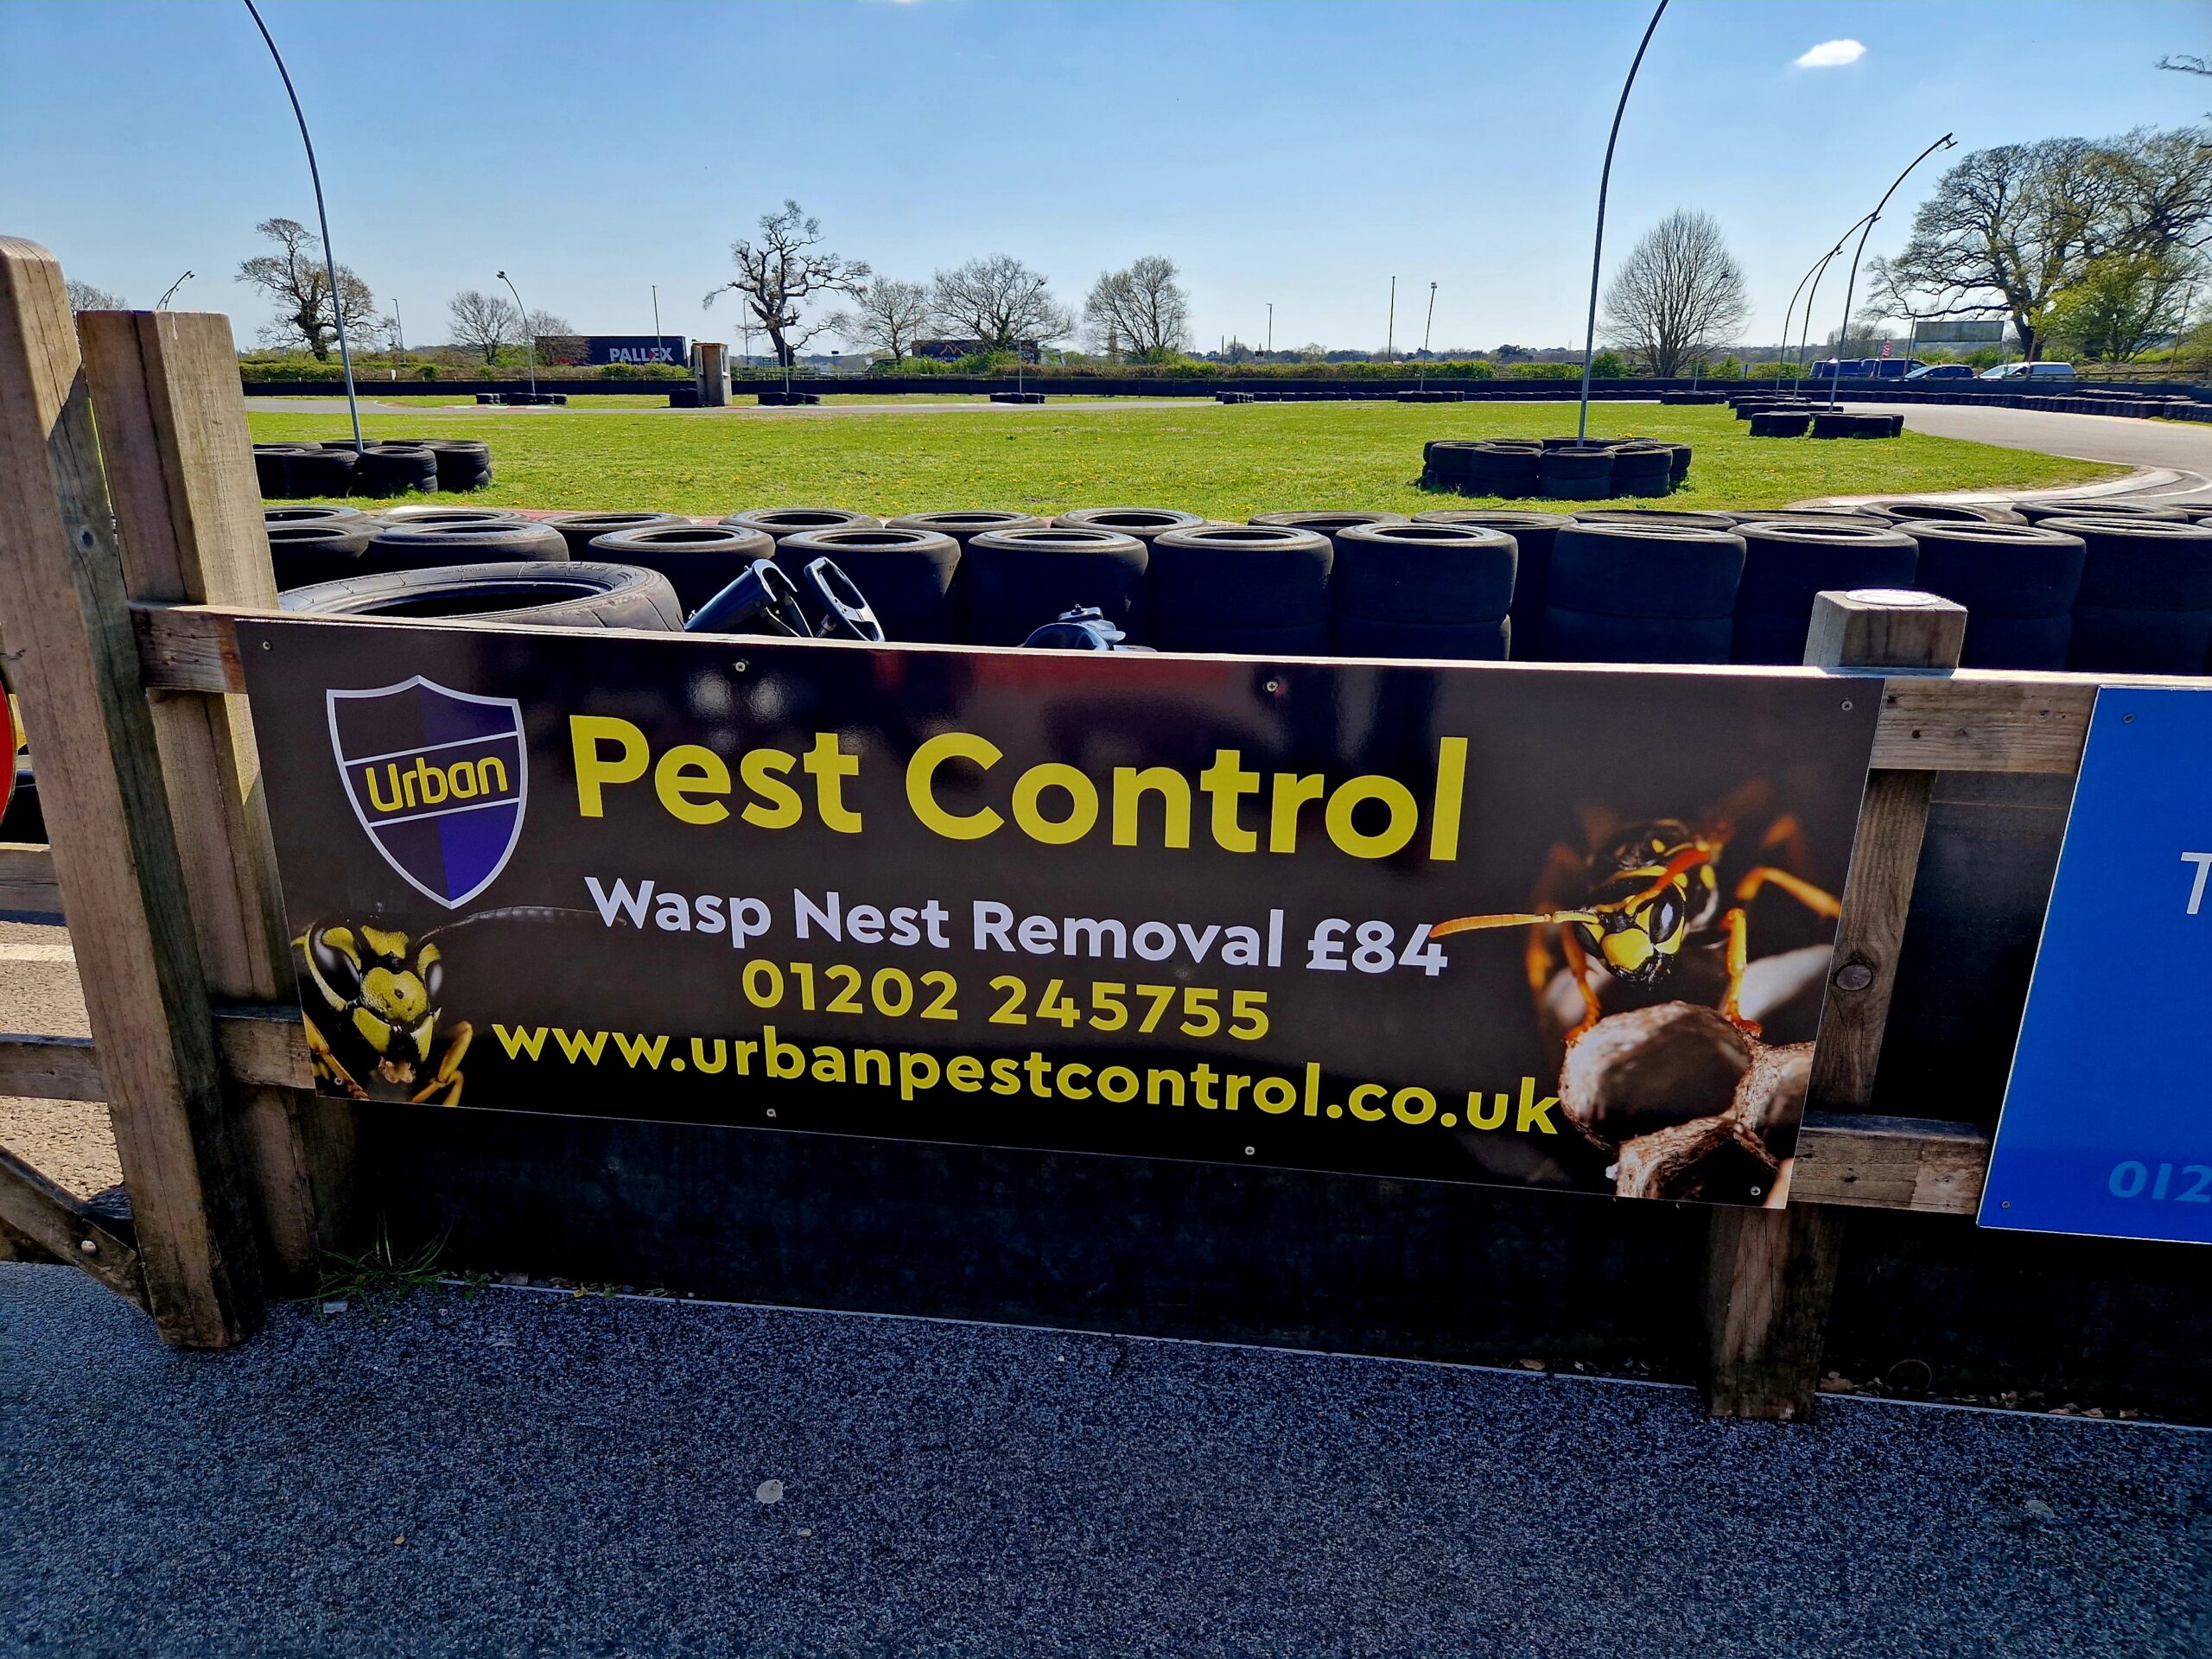 Wasp Nest Removal South Coast Karting